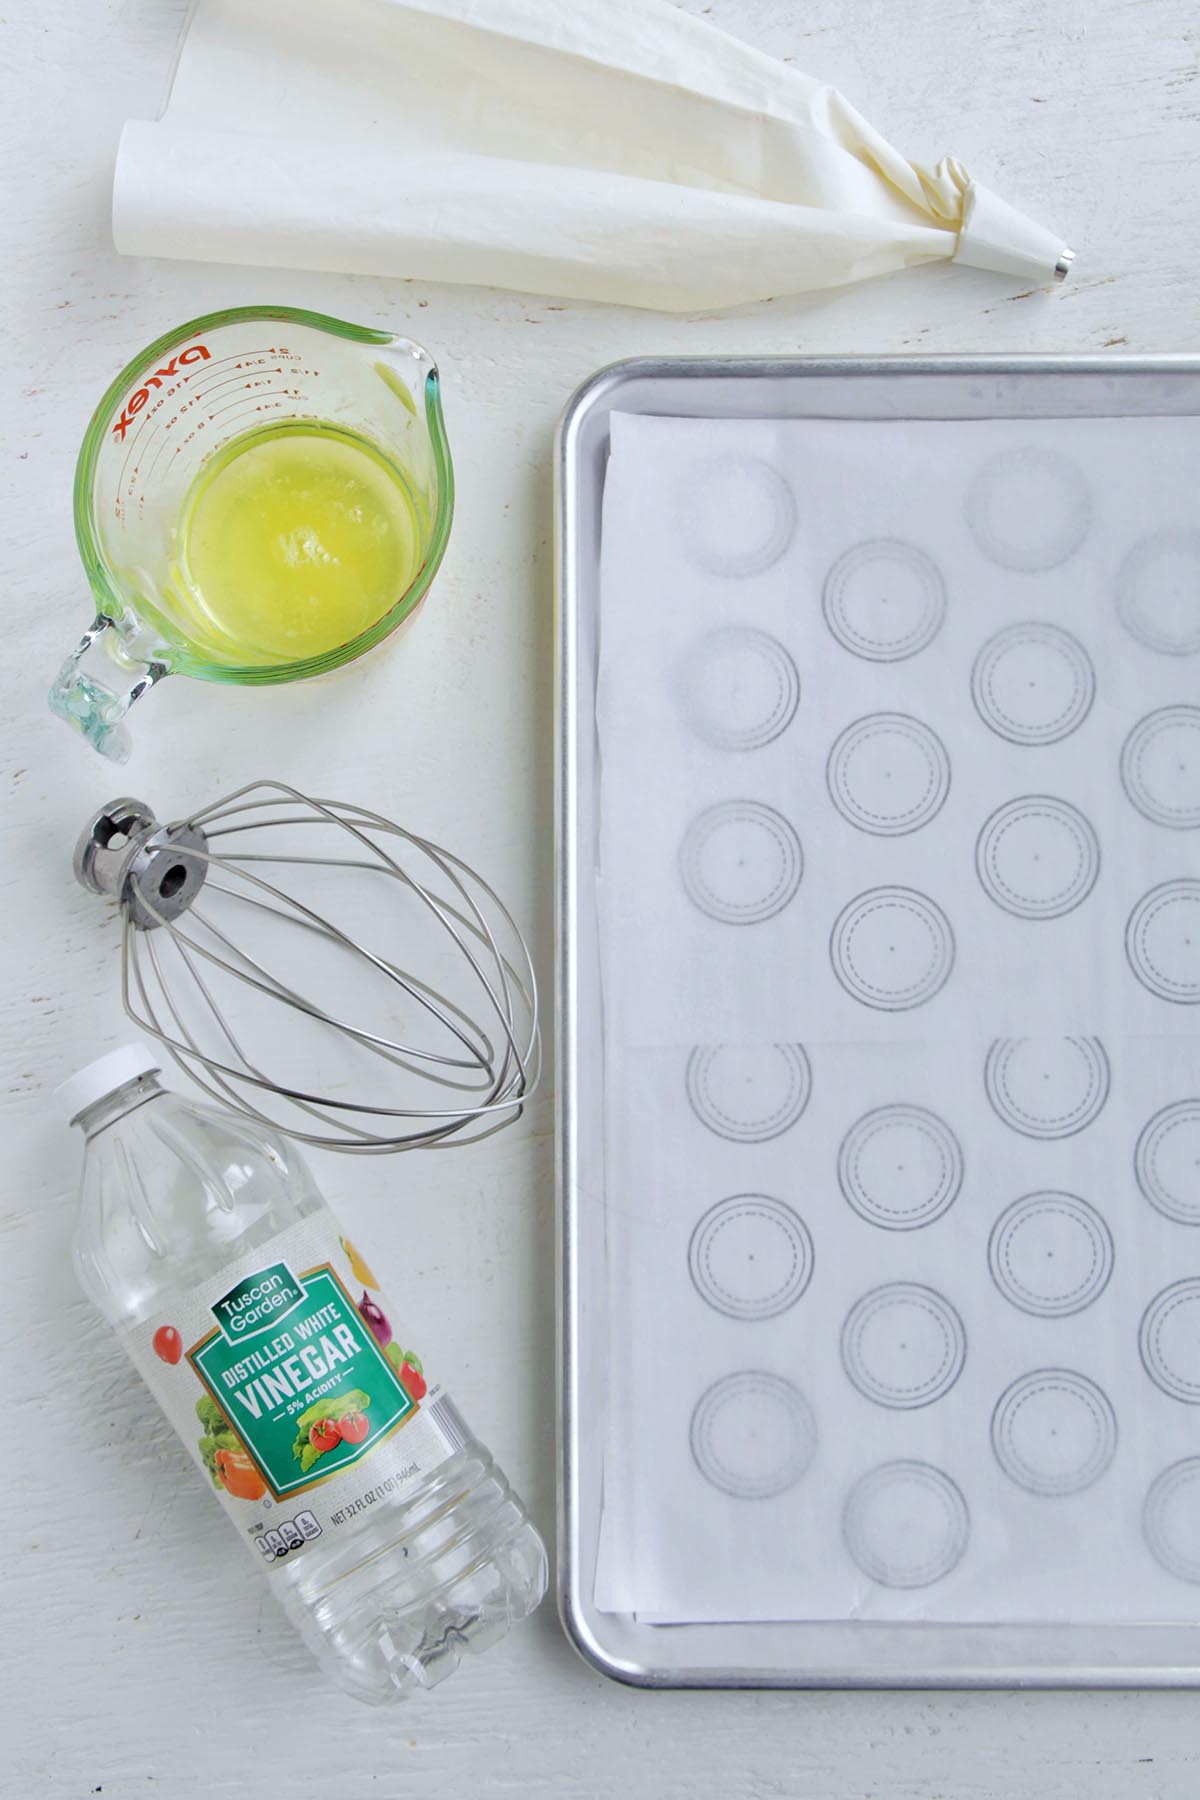 baking sheet with macaron template next to vinegar, whisk attachment, eggs, and piping bag.